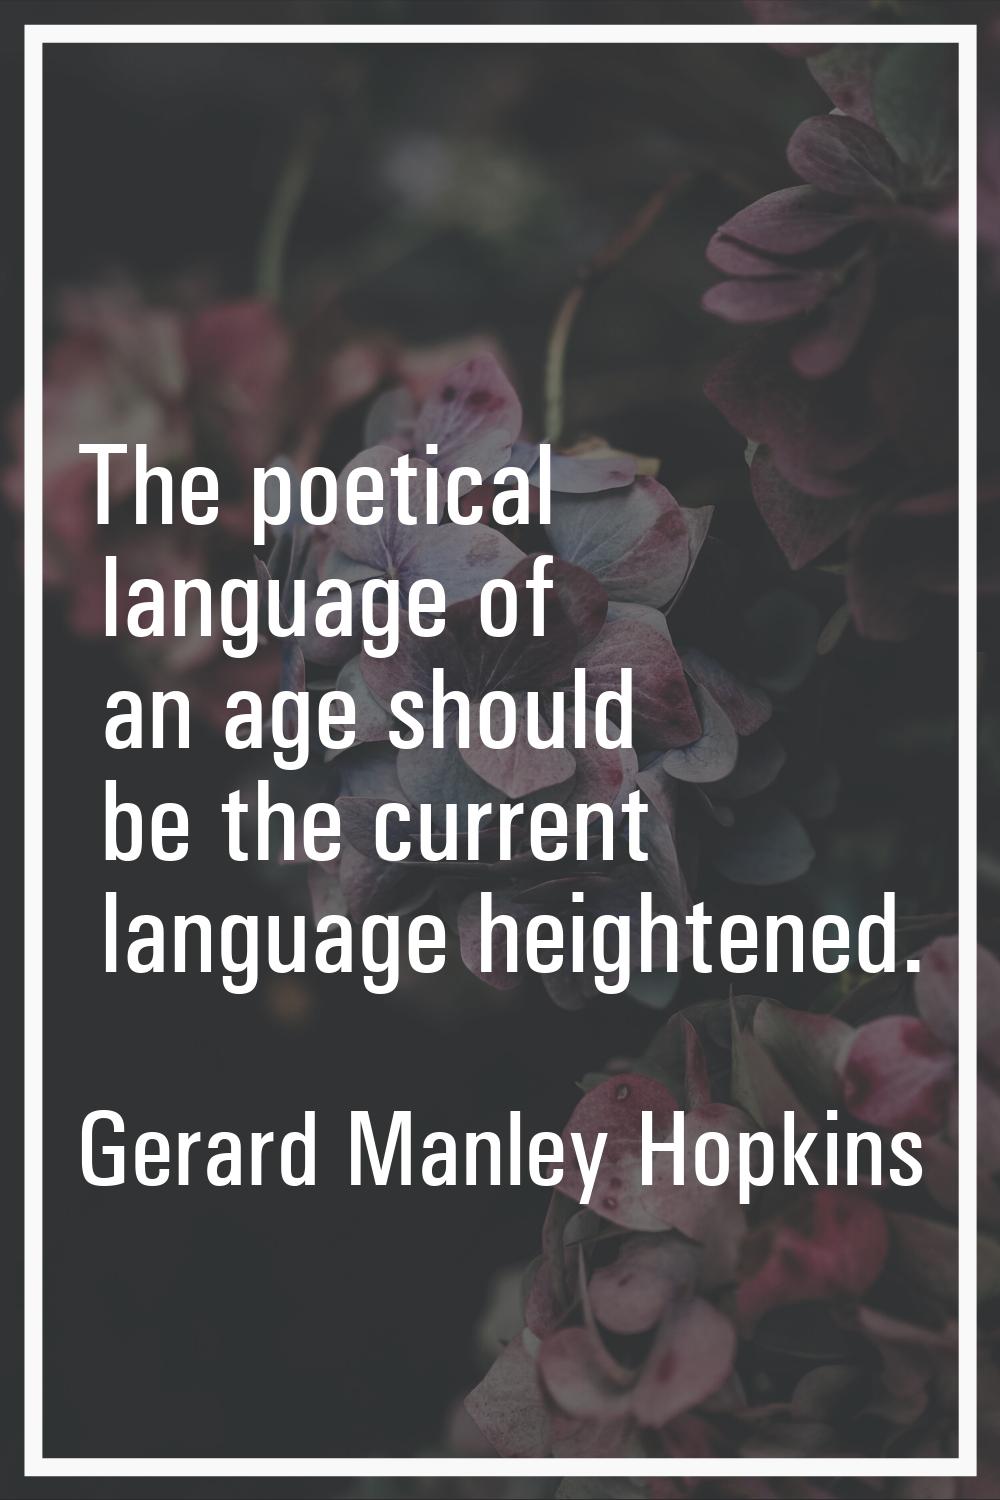 The poetical language of an age should be the current language heightened.